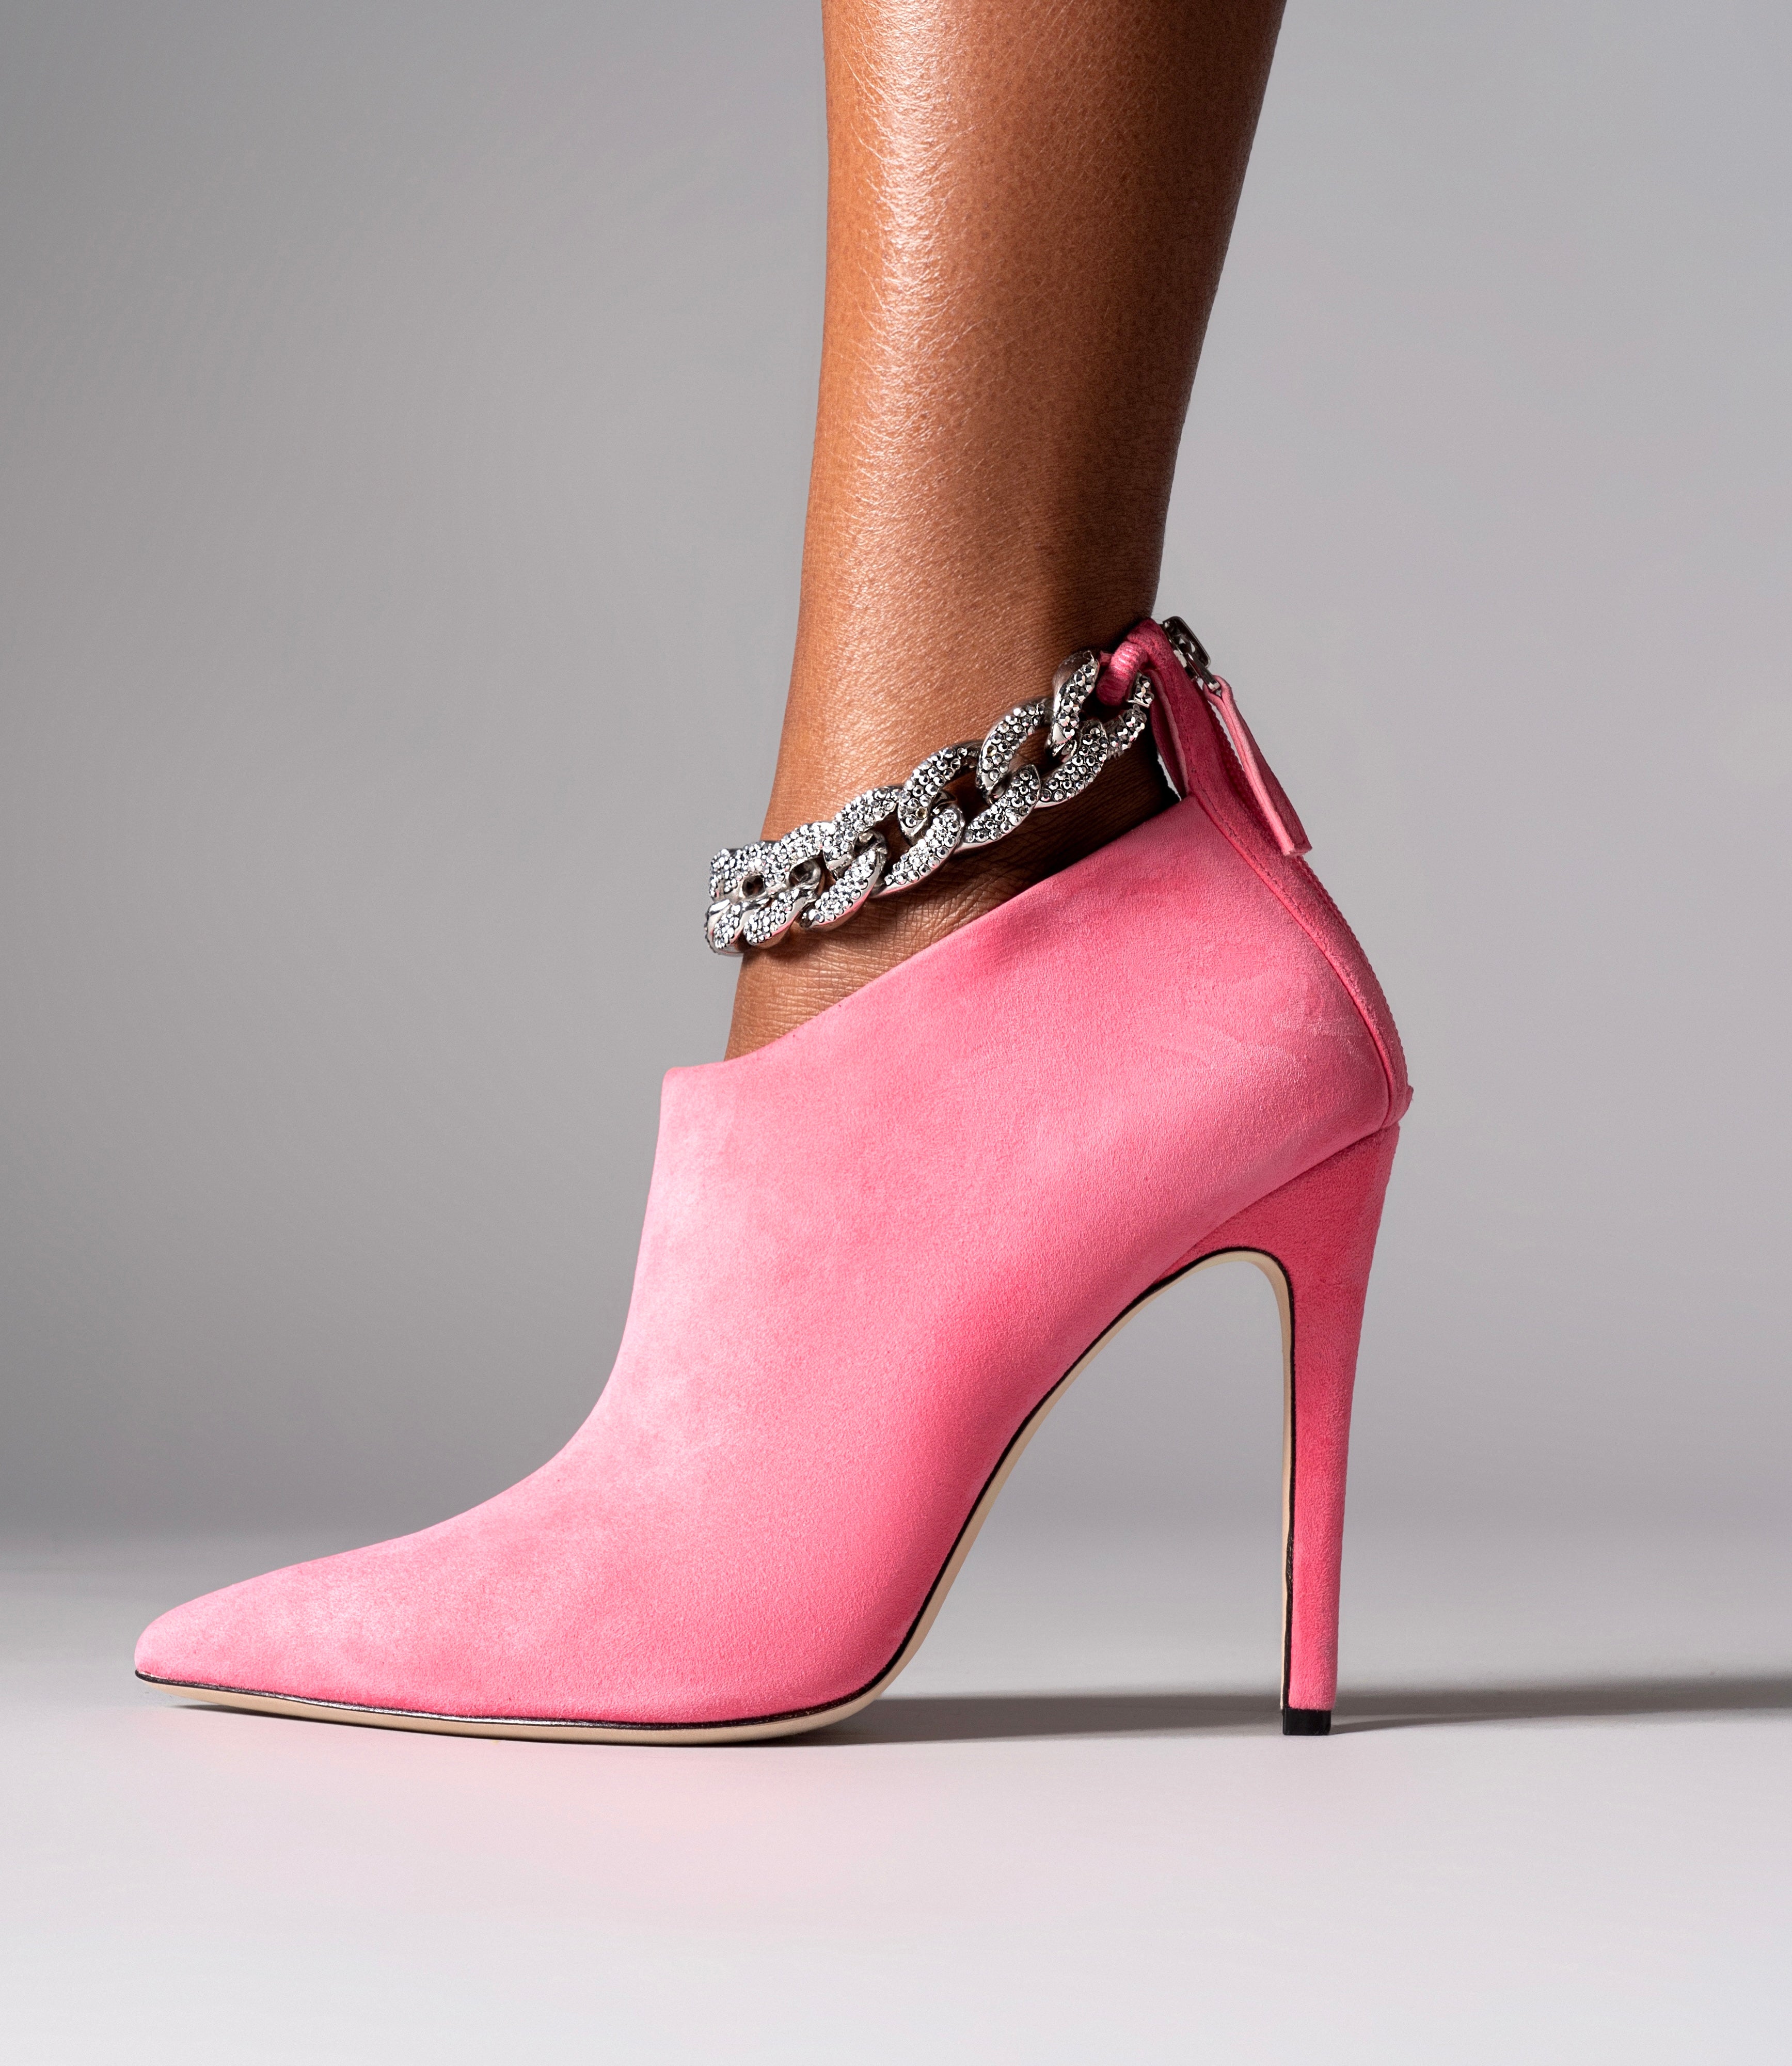 CRYSTAL CHAIN BOOT PINK